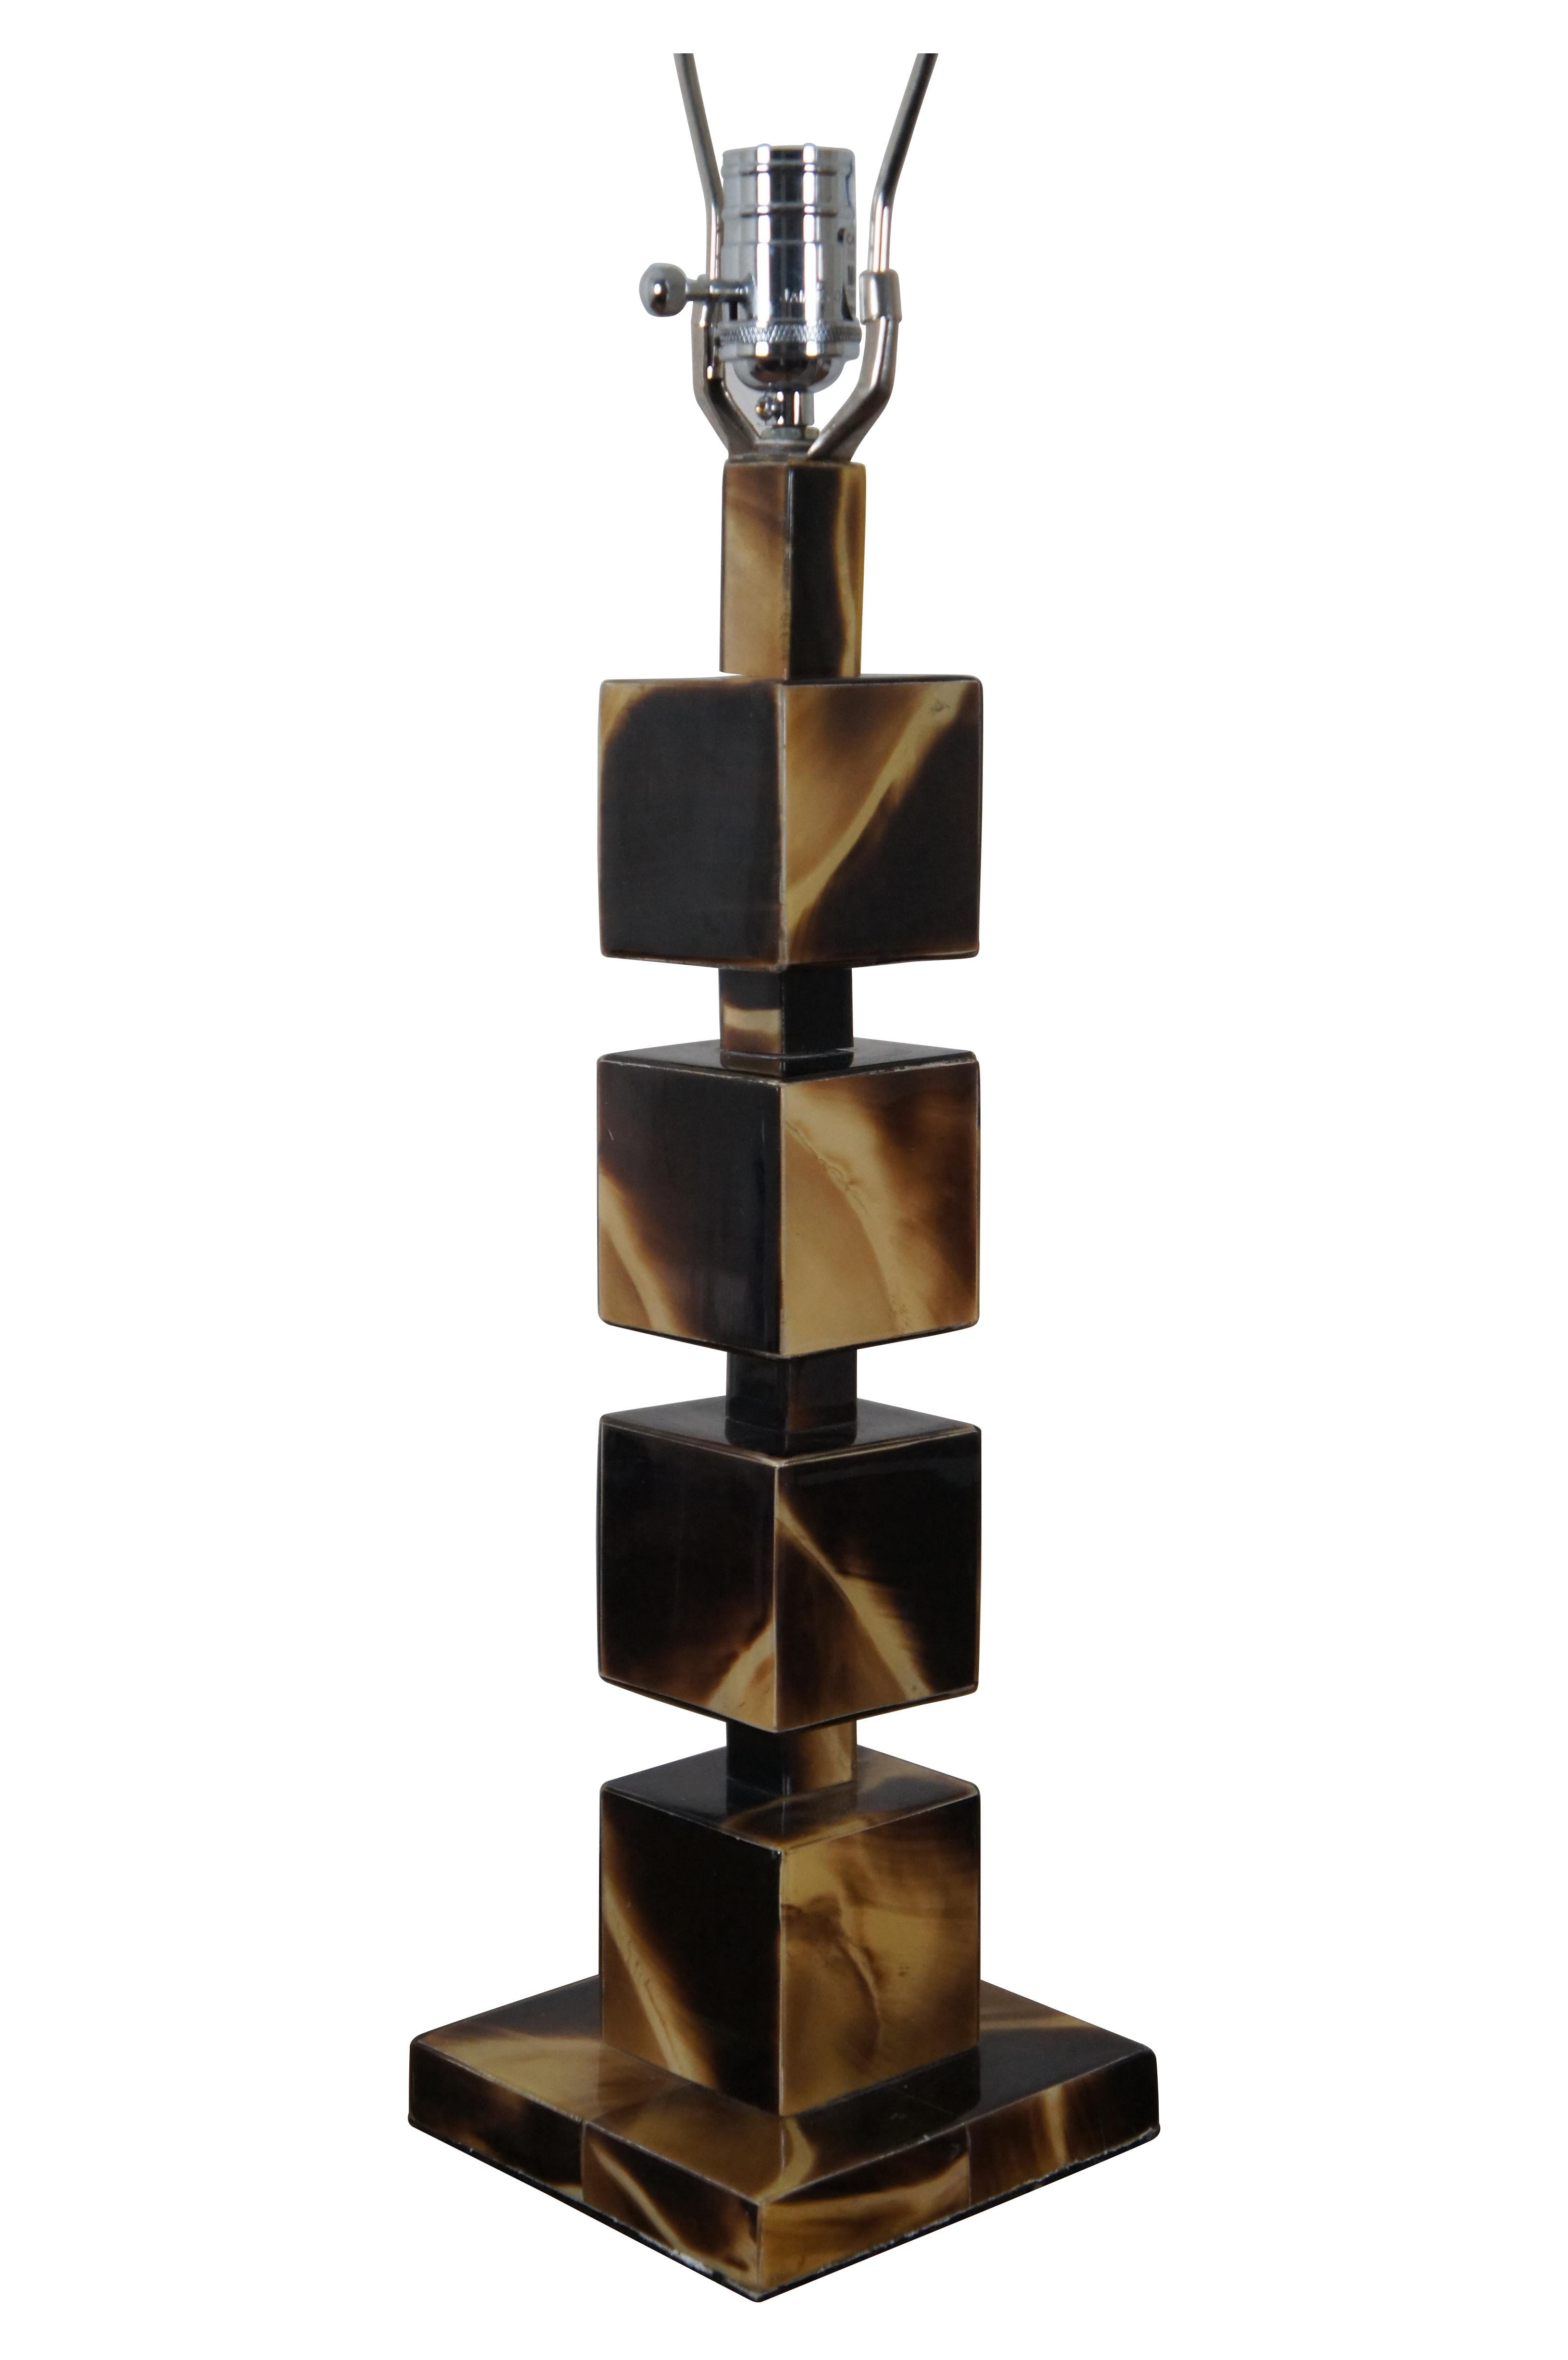 Vintage Jamie Young acrylic horn geometric table lamp featuring a stack of five cubes / blocks on a square base.  Includes harp and rectangular black finial.

Dimensions:
6” x 6” x 21.5” / Total Height – 28.5” (Width x Depth x Height)